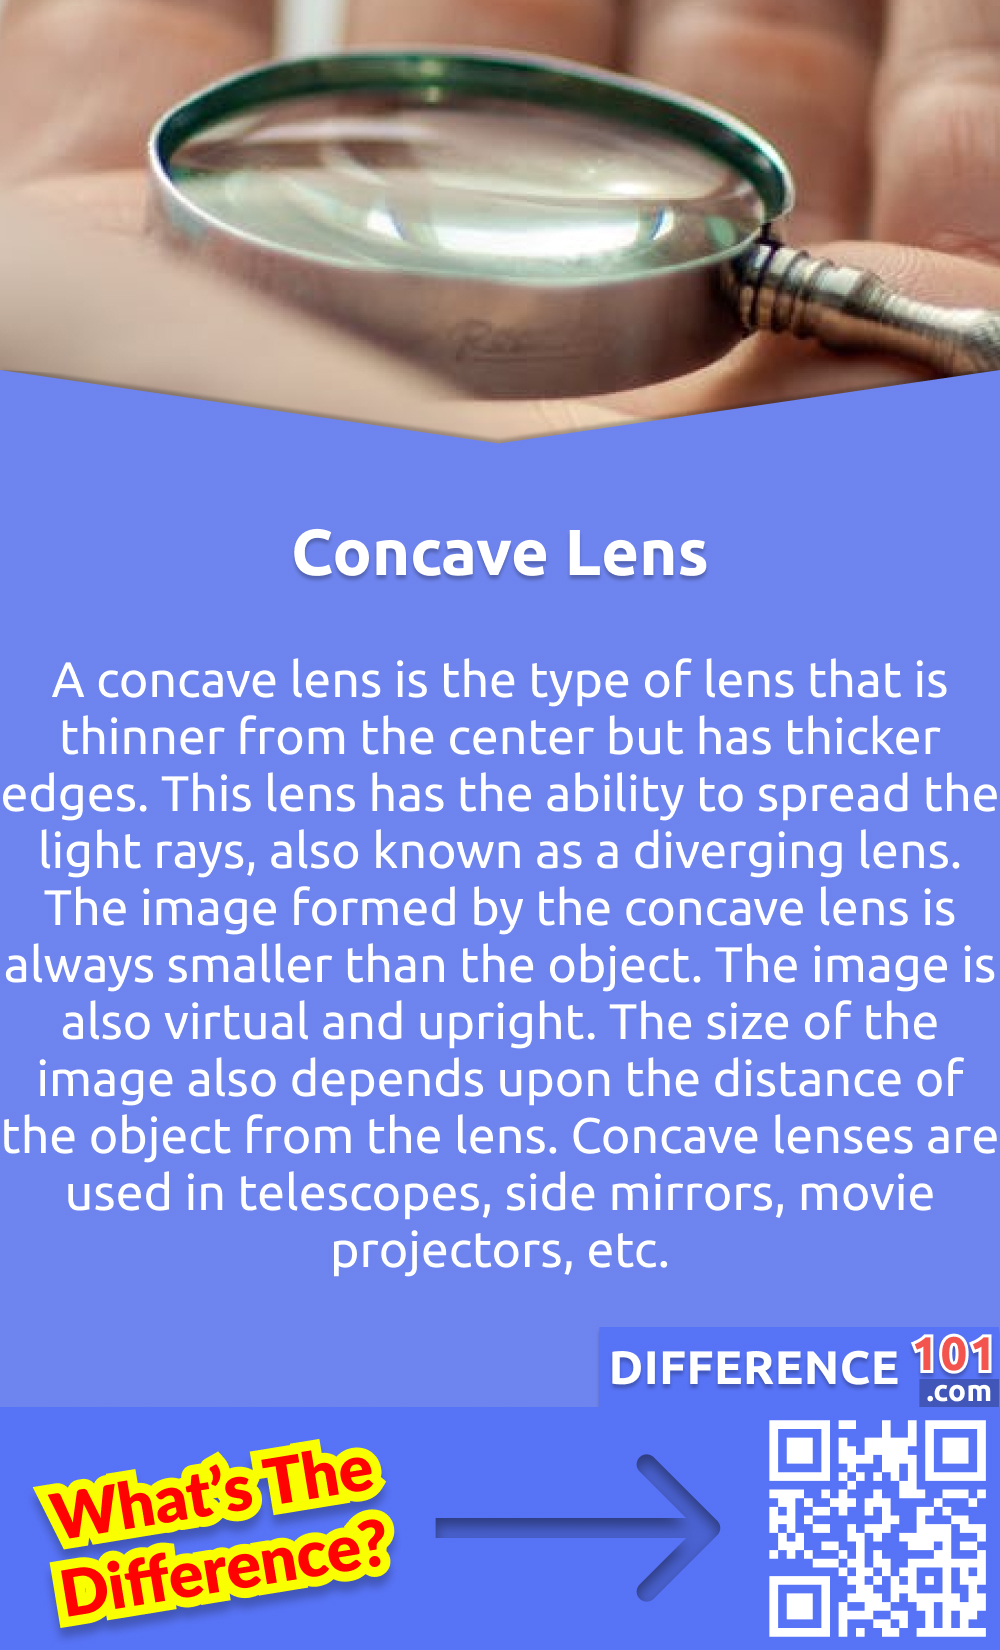 What are Concave Lens? A concave lens is the type of lens that is thinner from the center but has thicker edges. This lens has the ability to spread the light rays, also known as a diverging lens. The image formed by the concave lens is always smaller than the object. The image is also virtual and upright. The size of the image also depends upon the distance of the object from the lens. Concave lenses are used in telescopes, side mirrors, movie projectors, etc.